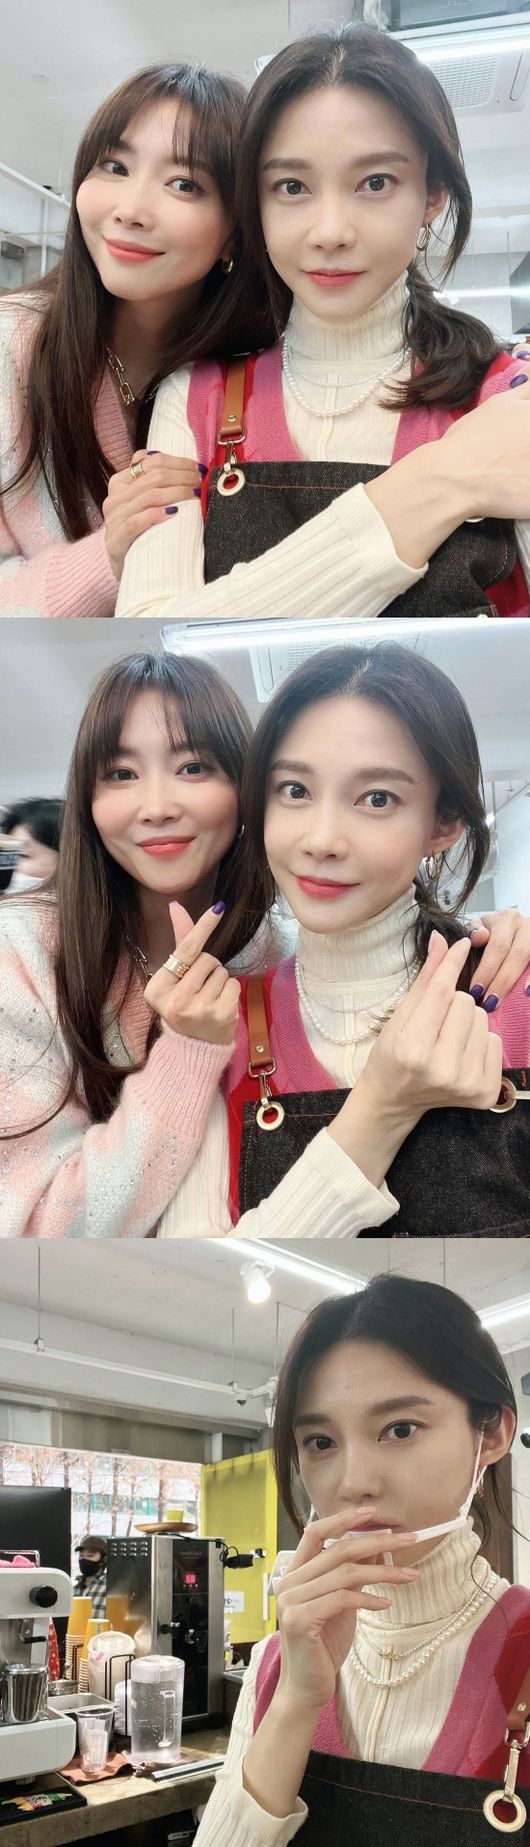 Actor Cha Ye-ryun boasted steamy chemistry with Oh Yoon-ah.Cha Ye-ryun wrote on his personal Instagram account on May 5, With my Im Yoon-ah sister who is so grateful for her step, I am a loving and loving Im Yoon-ah sister and these days I am a hot-headed mode.Im Yoon-ah is love. Thank you sister. Cha Ye-ryun and Oh Yoon-ah in the public photos are taking a self-portrait with their arms folded or fingers hearted.The two of them show off their beauty for an incredible time that they each had a daughter and son.Fans who have seen this are responding to Both are beautiful, Shining beauty and Both beautiful.Meanwhile, Cha Ye-ryun marriages Actor Ju Sang-wook in 2017 and has a daughter in her life.Cha Ye-ryun SNS